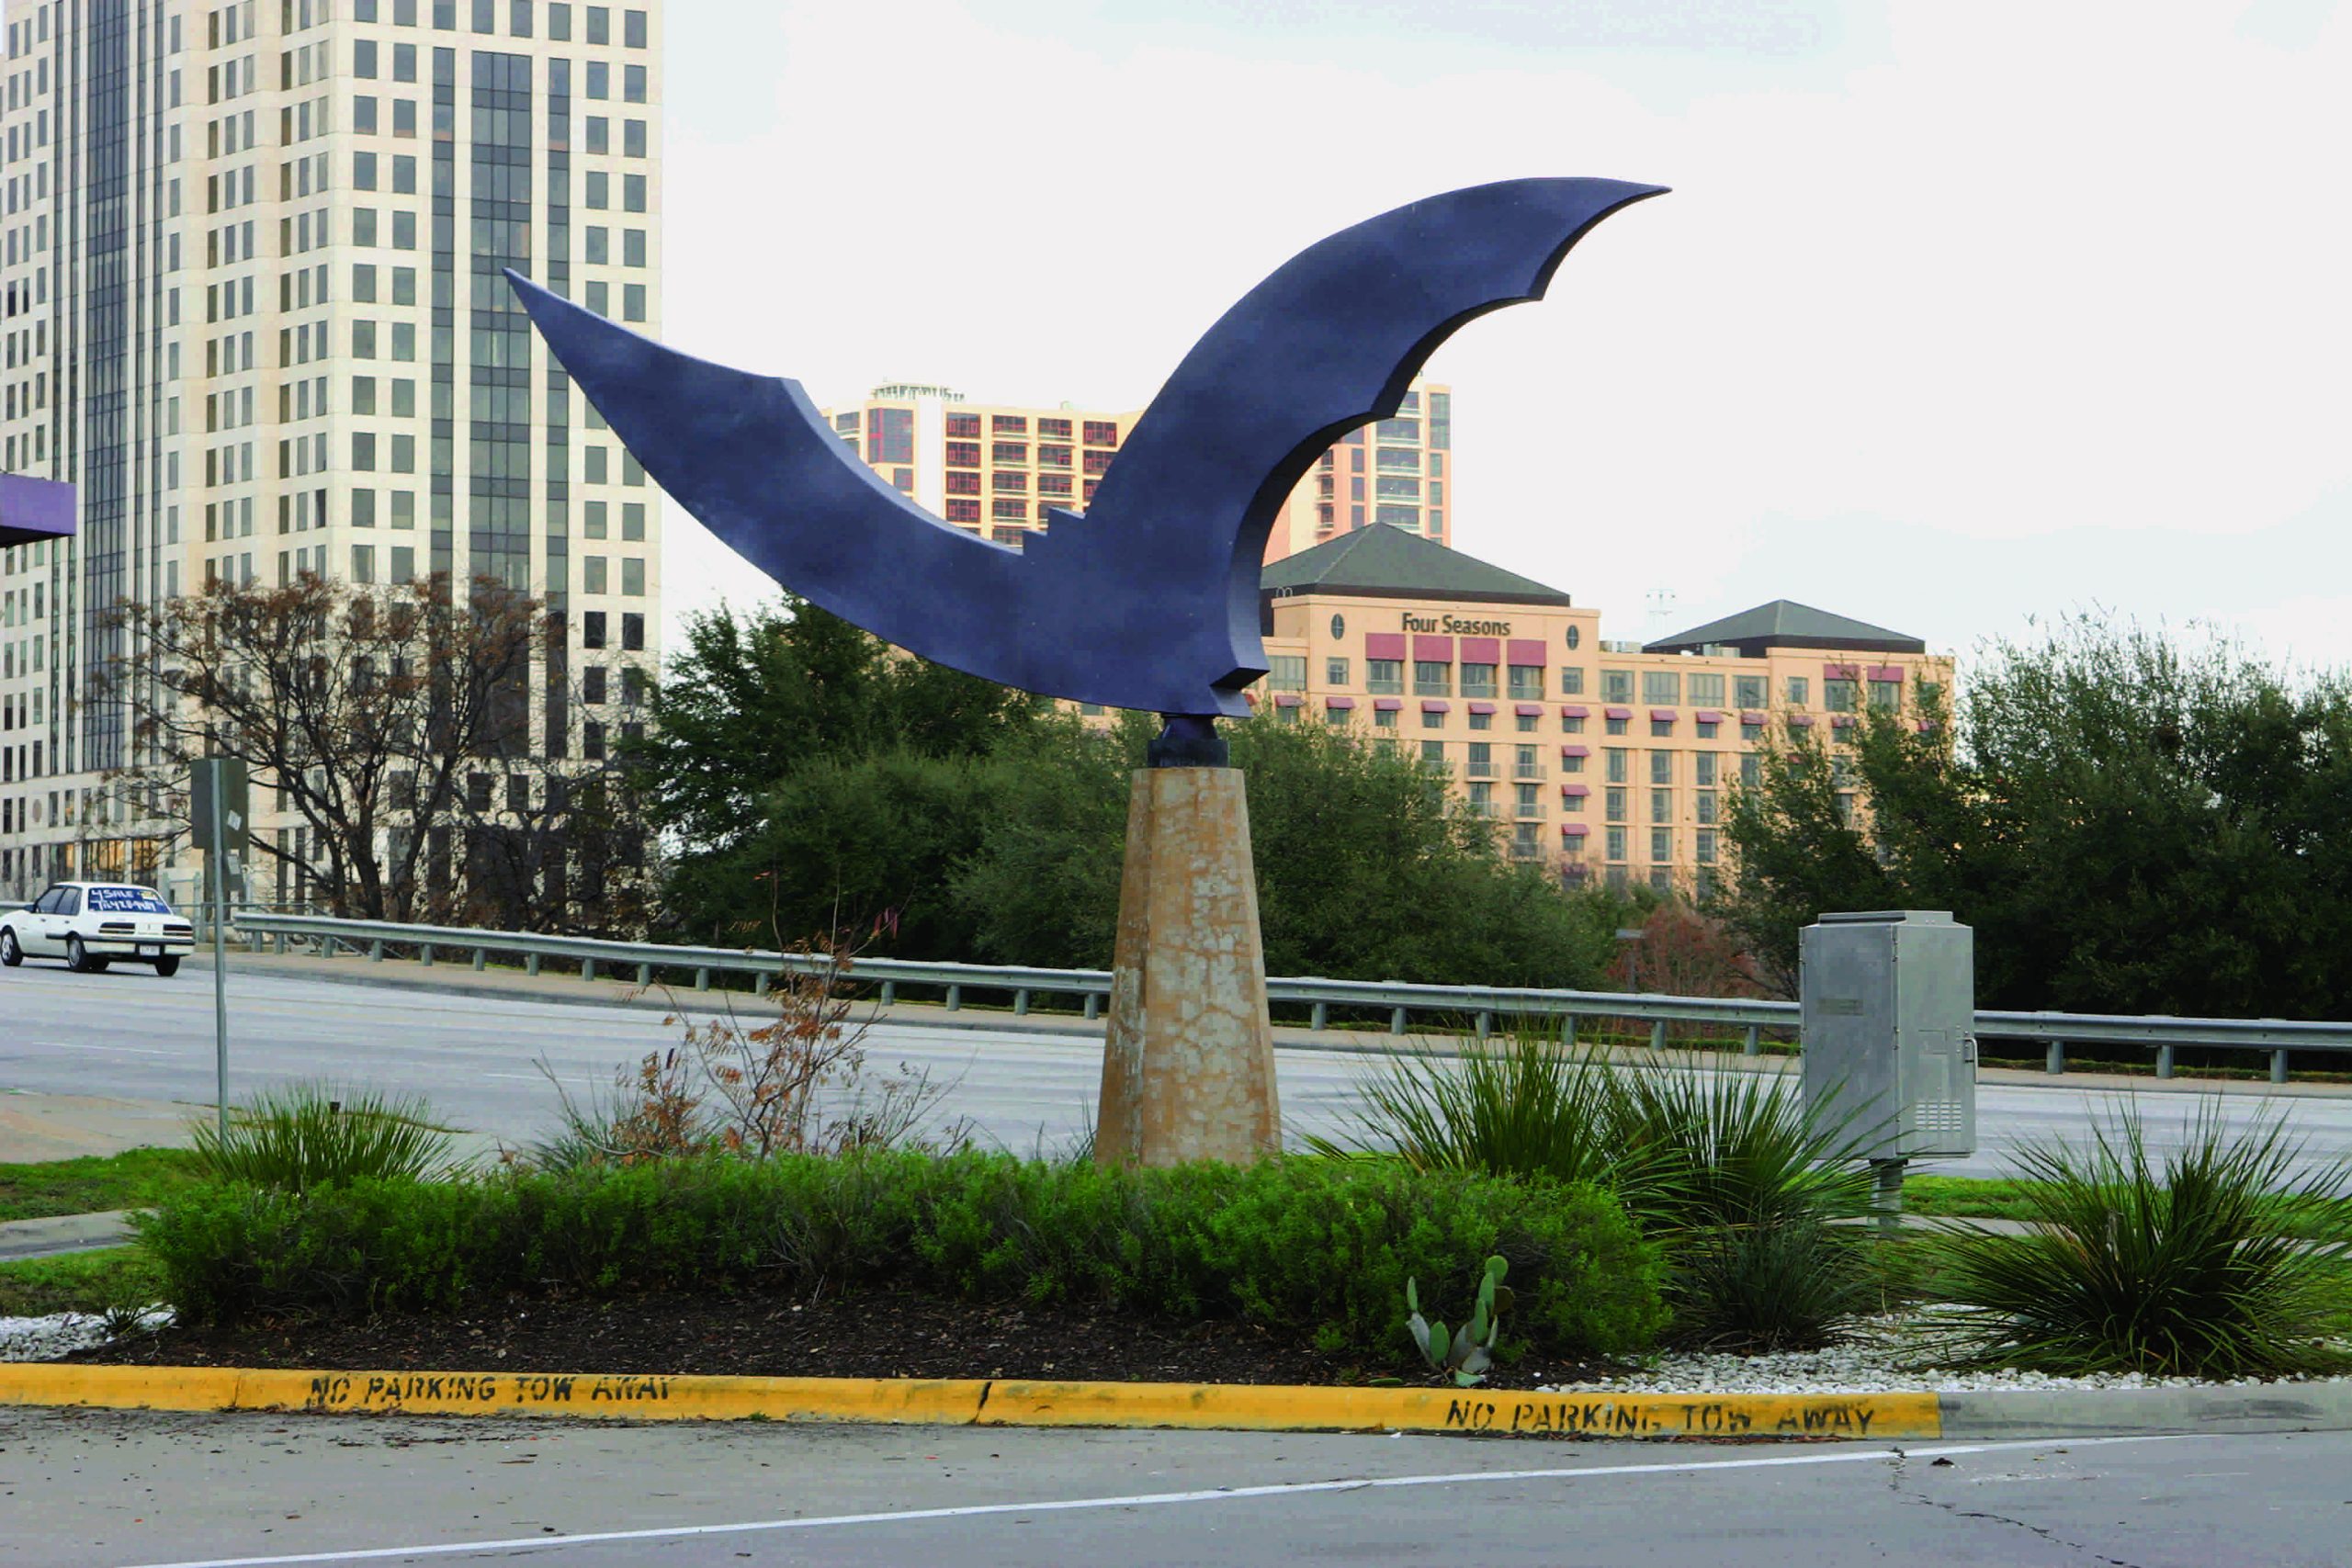 Best Statues To Admire in Austin